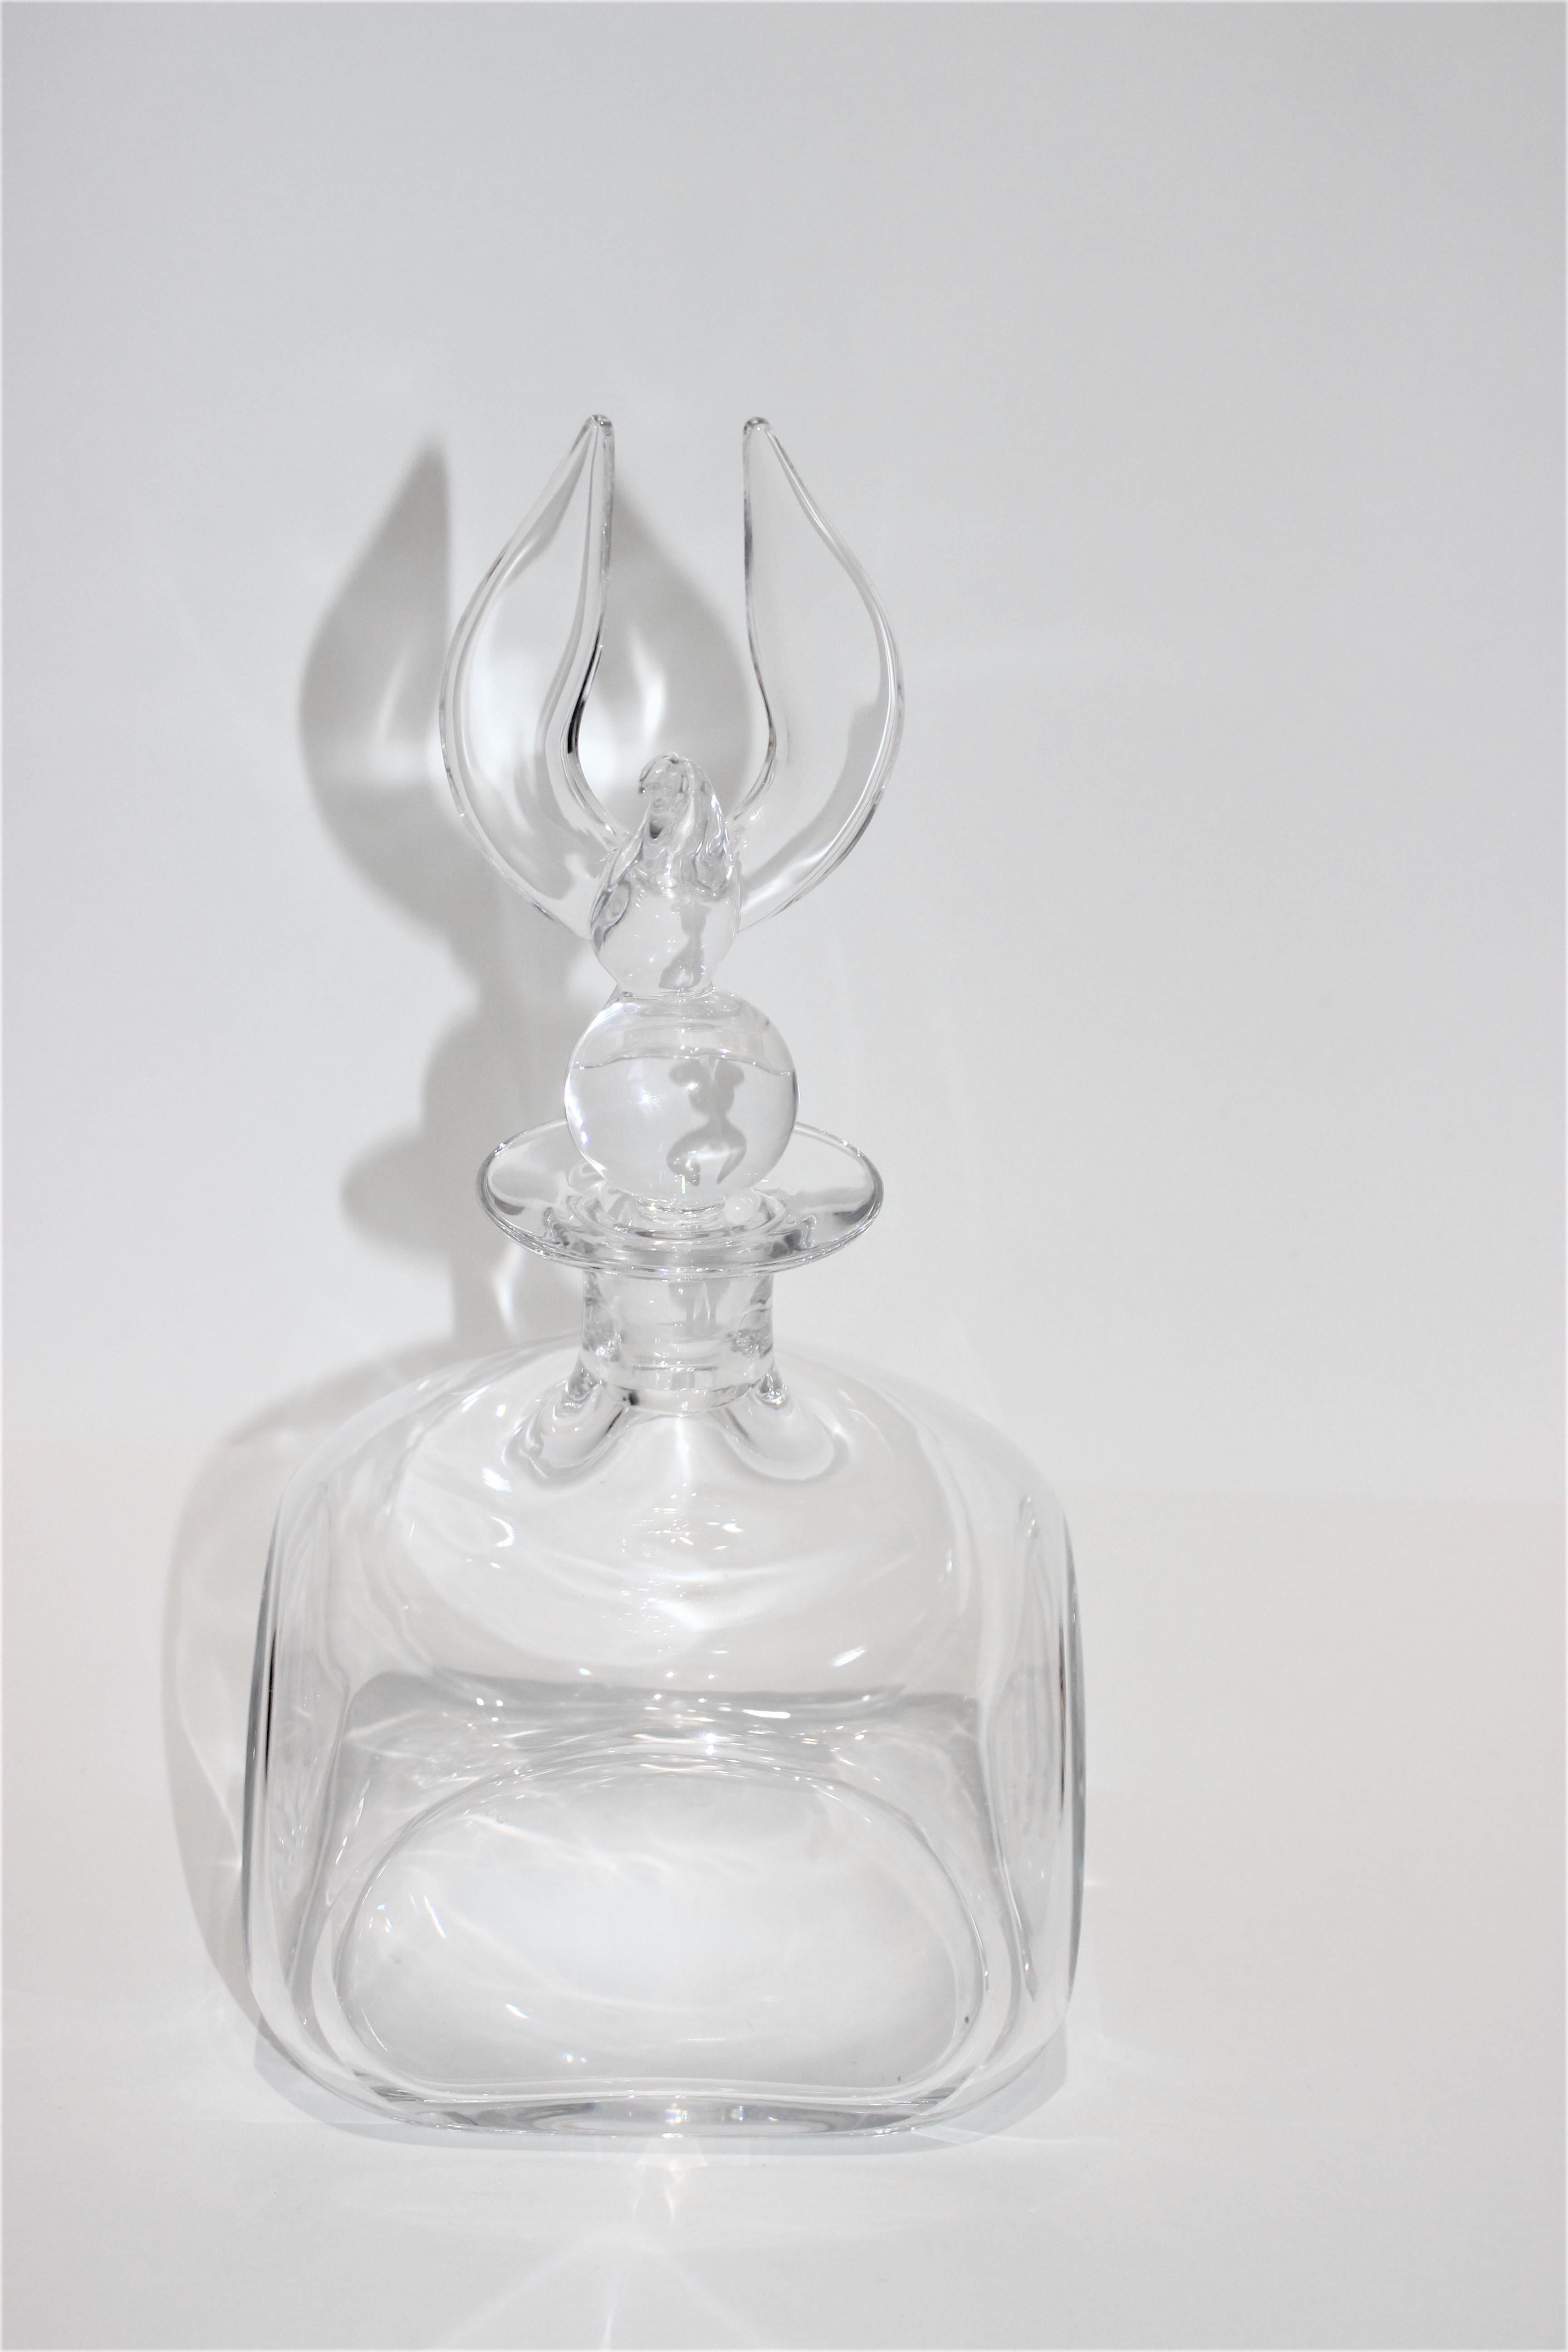 Steuben crystal decanter with American eagle stopper on a ball, a stylized globe of the world, designed by Lloyd Atkins, it was first introduced in 1973 and is no longer in production.

Signed en verso - see last image

Square decanter with rounded